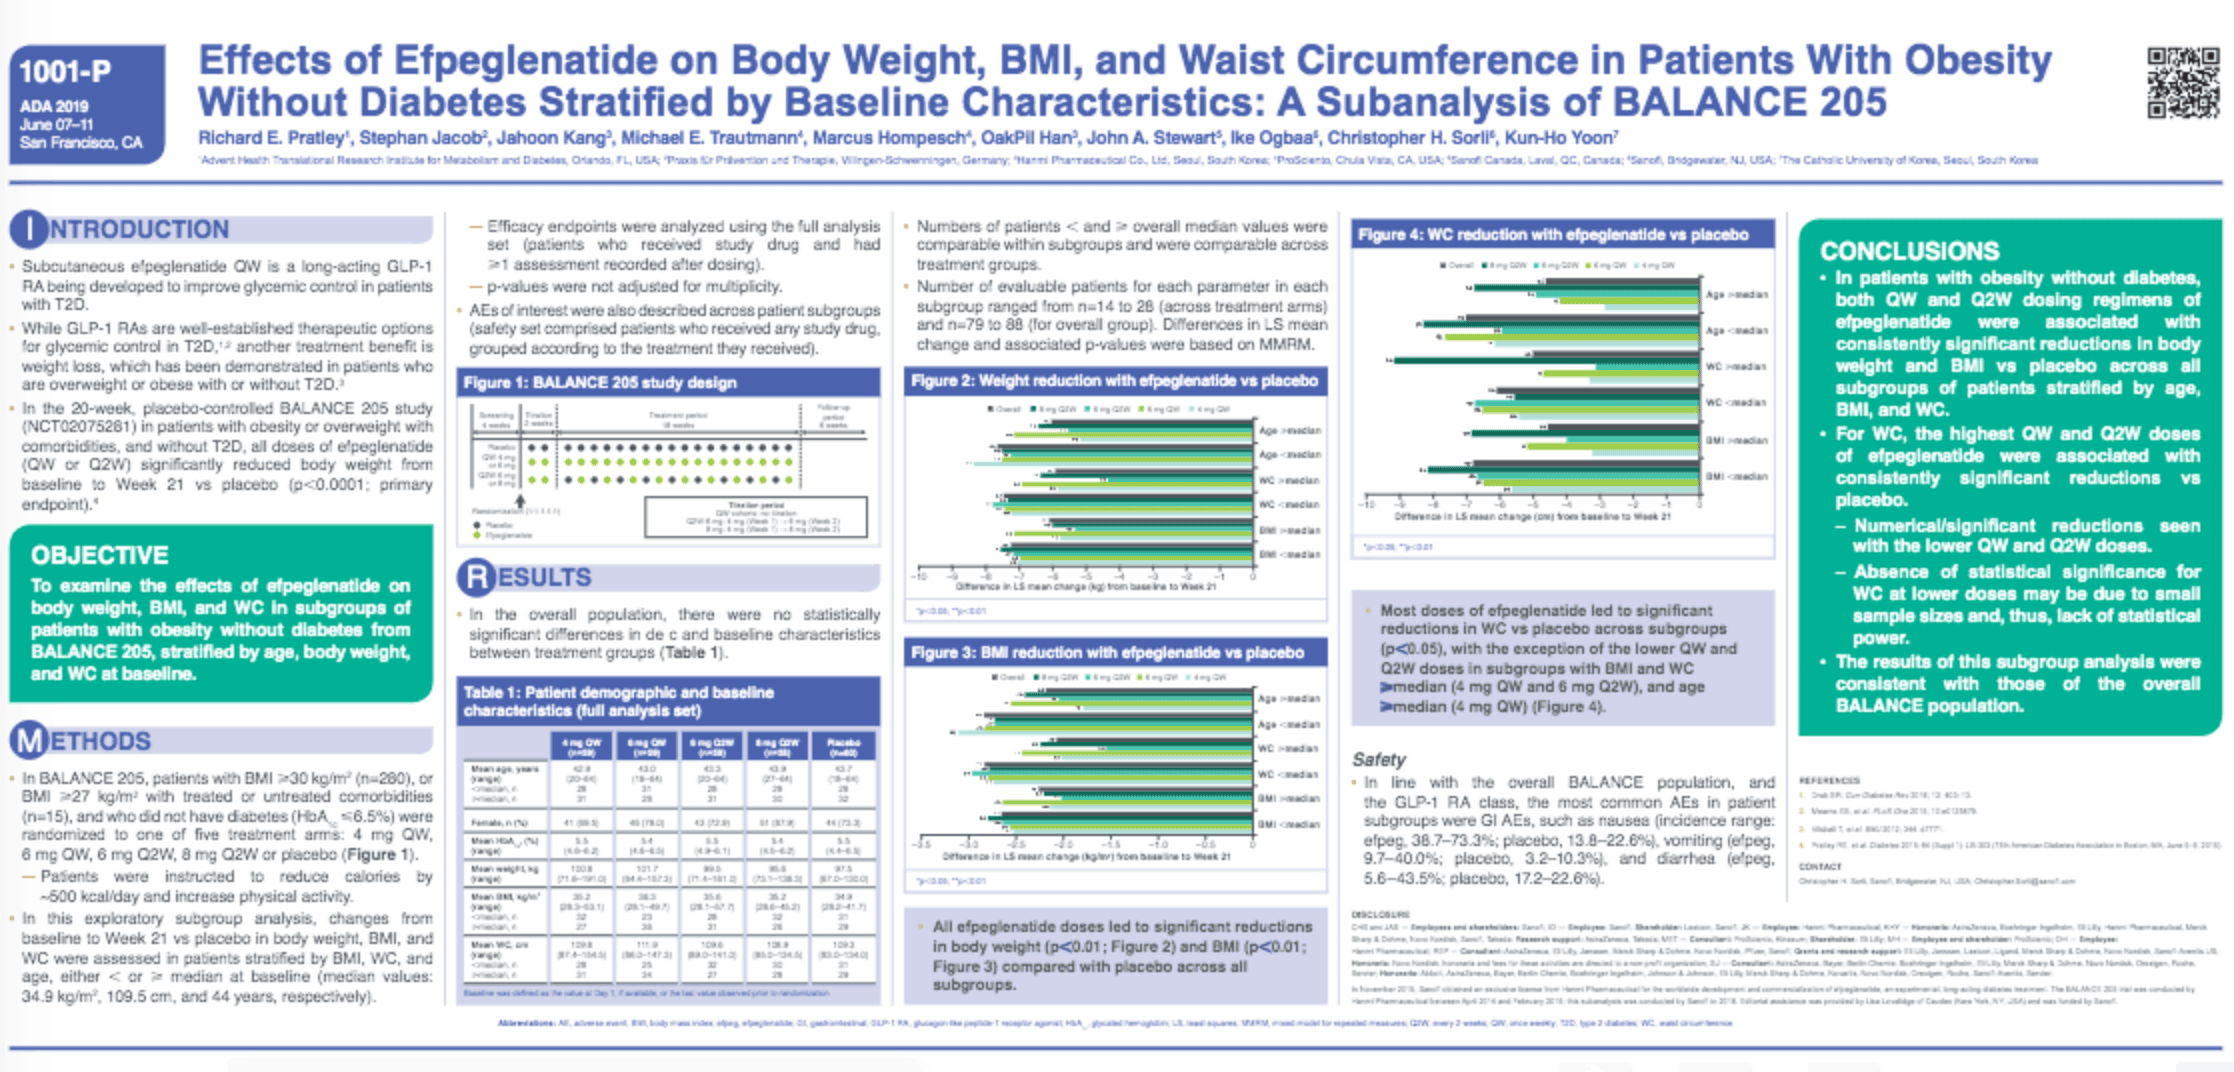 image of Effects of Efpeglenatide on Body Weight, BMI, and Waist Circumference in Patients With Obesity Without Diabetes Stratified by Baseline Characteristics: A Subanalysis of BALANCE 205